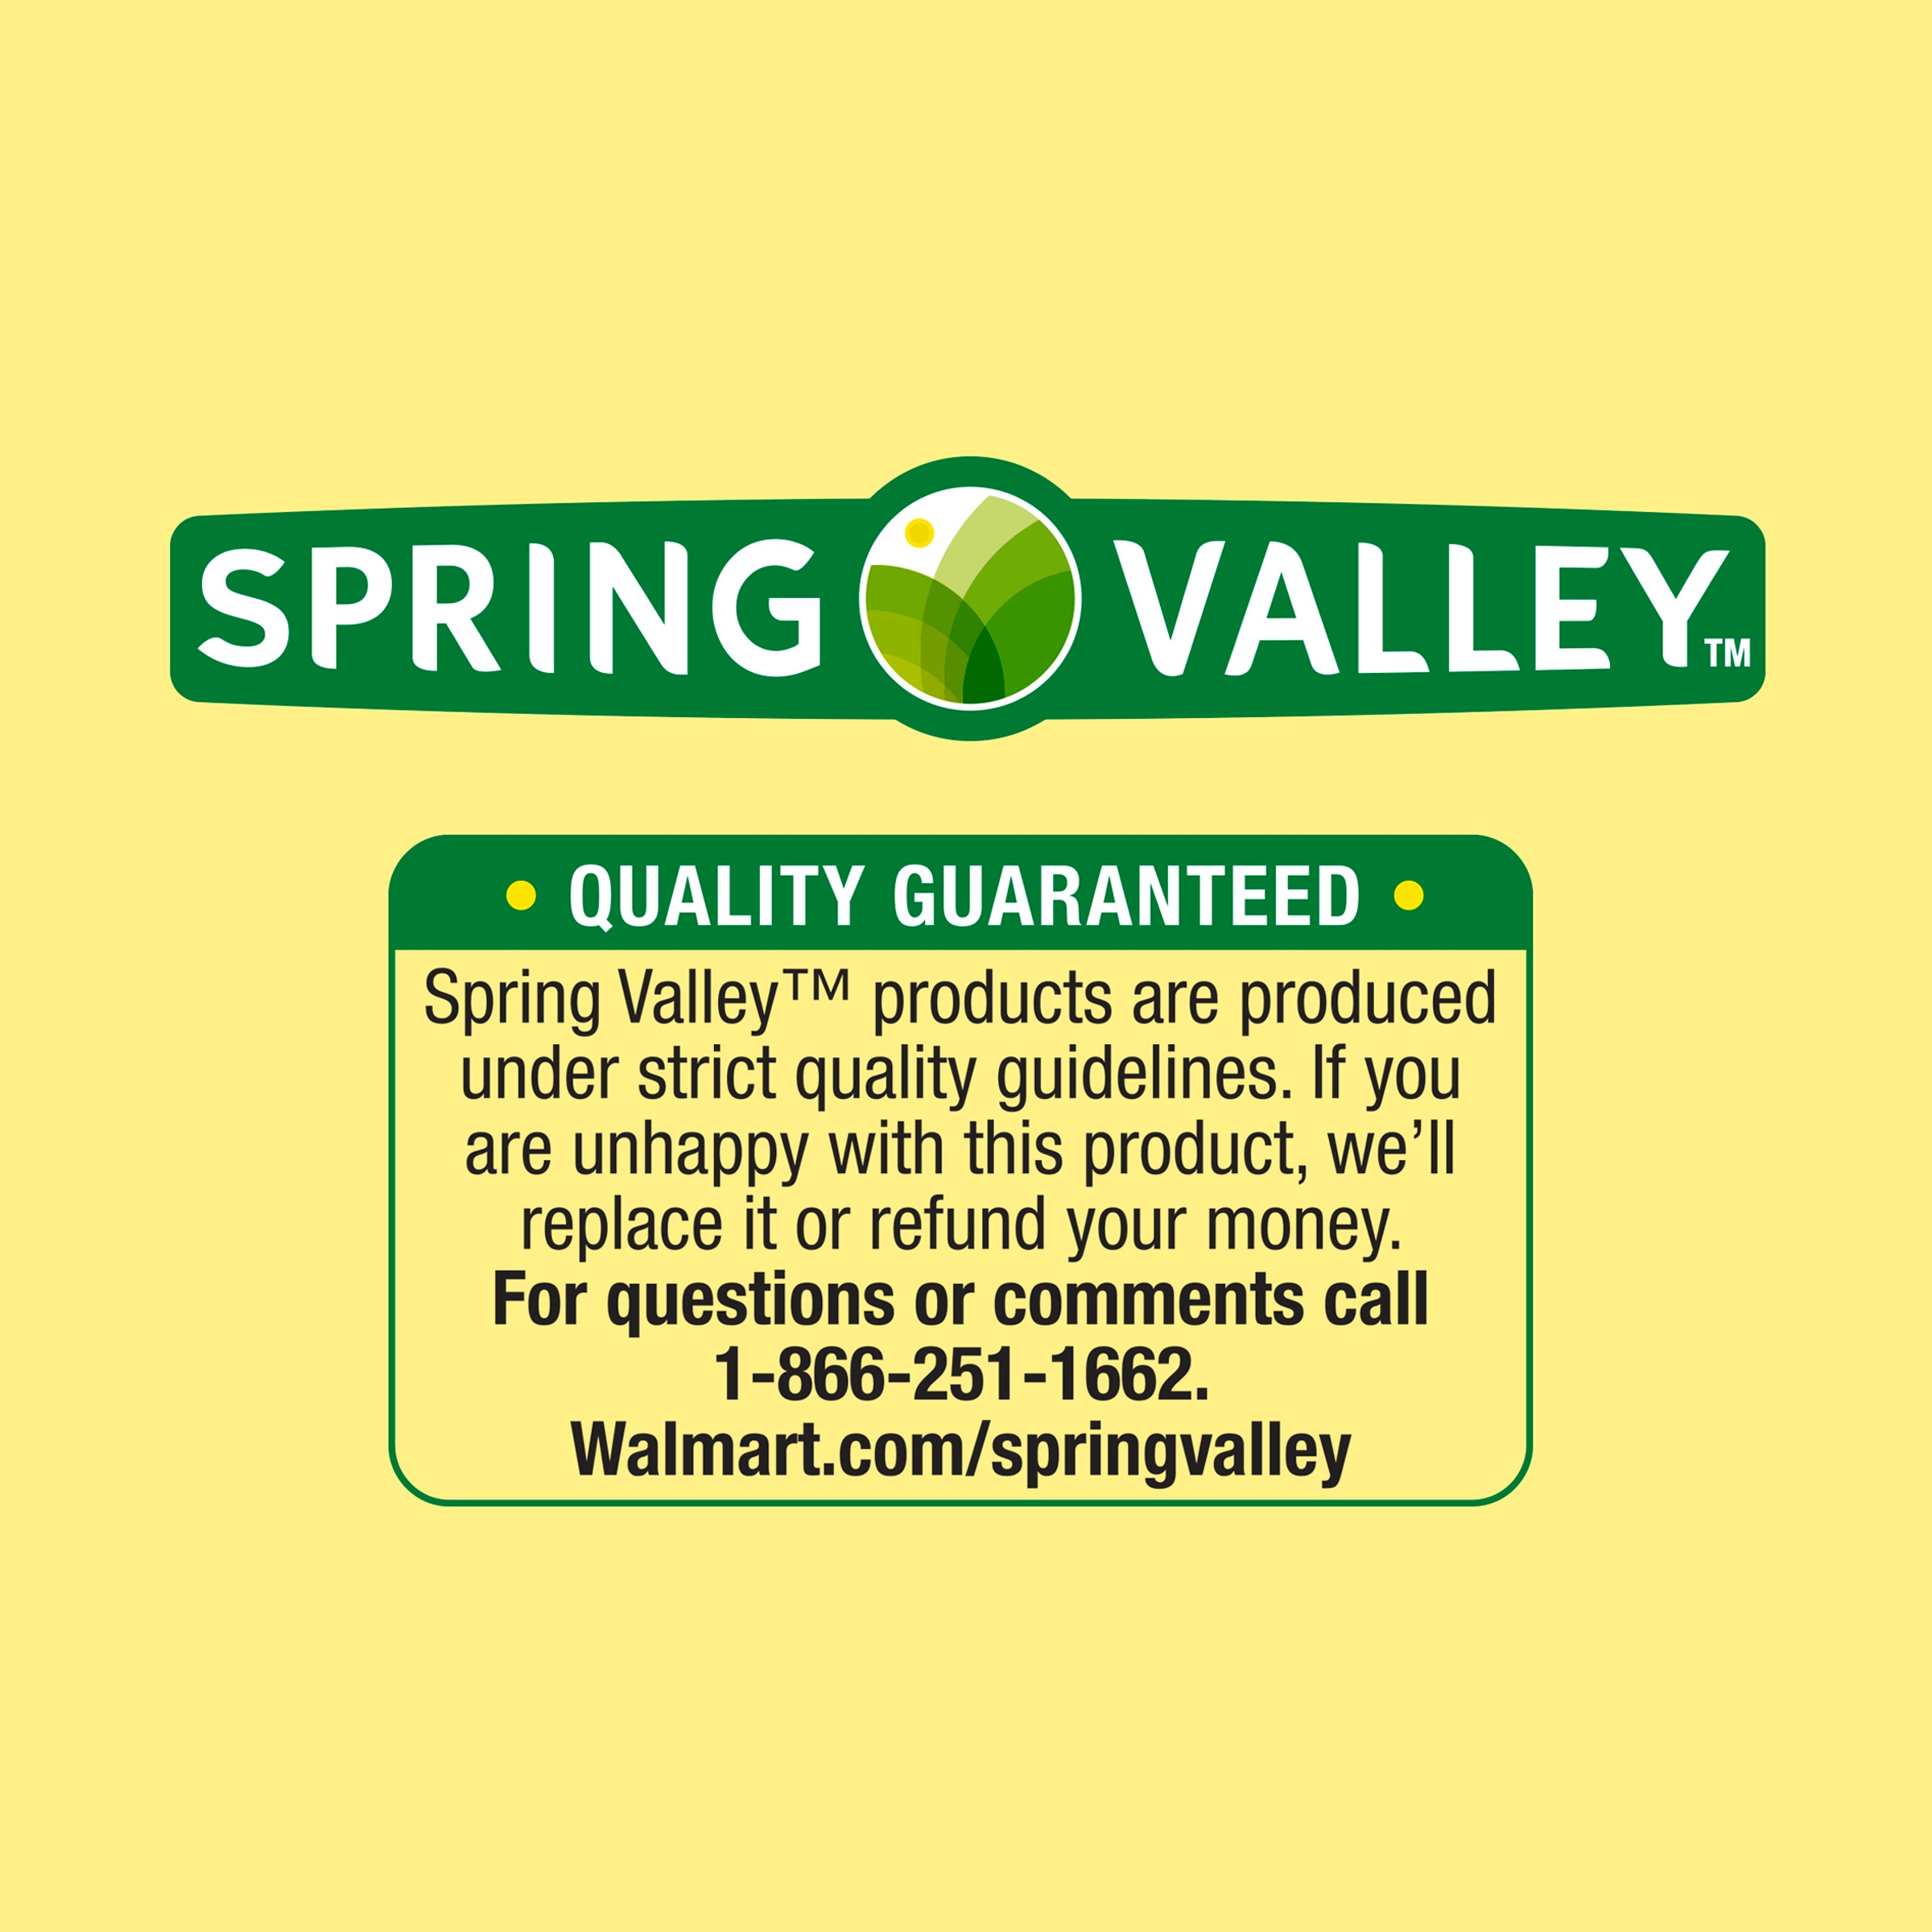 Spring Valley Rapid-Release CoQ10 Dietary Supplement 100mg Softgels, 60 Count, 2 Pack - image 8 of 8